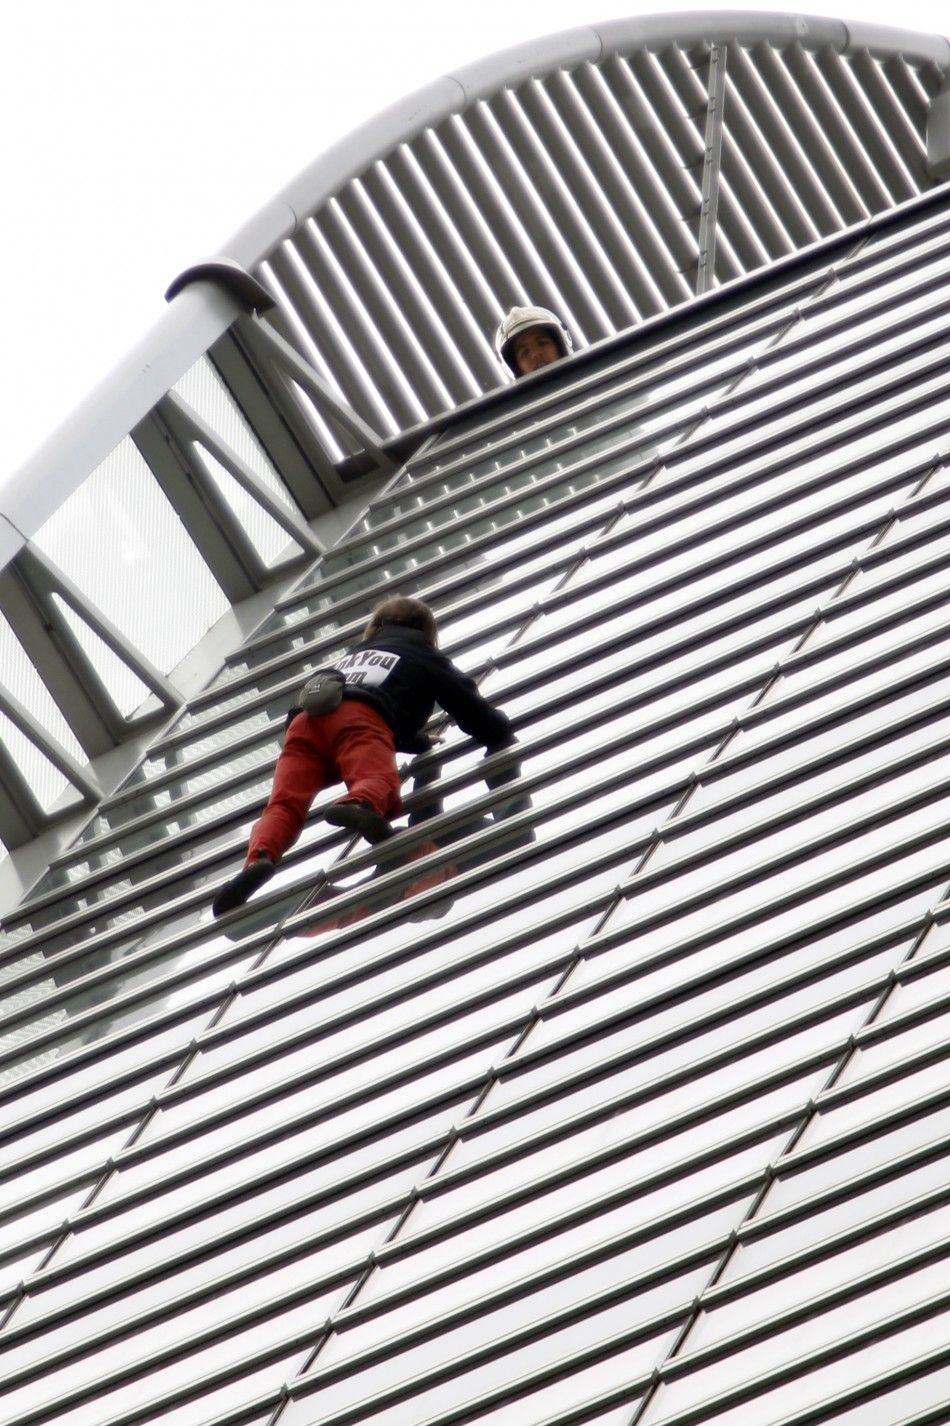 French climber Alain Robert scales the 185 metre GDF Suez Tower at the La Defense business district